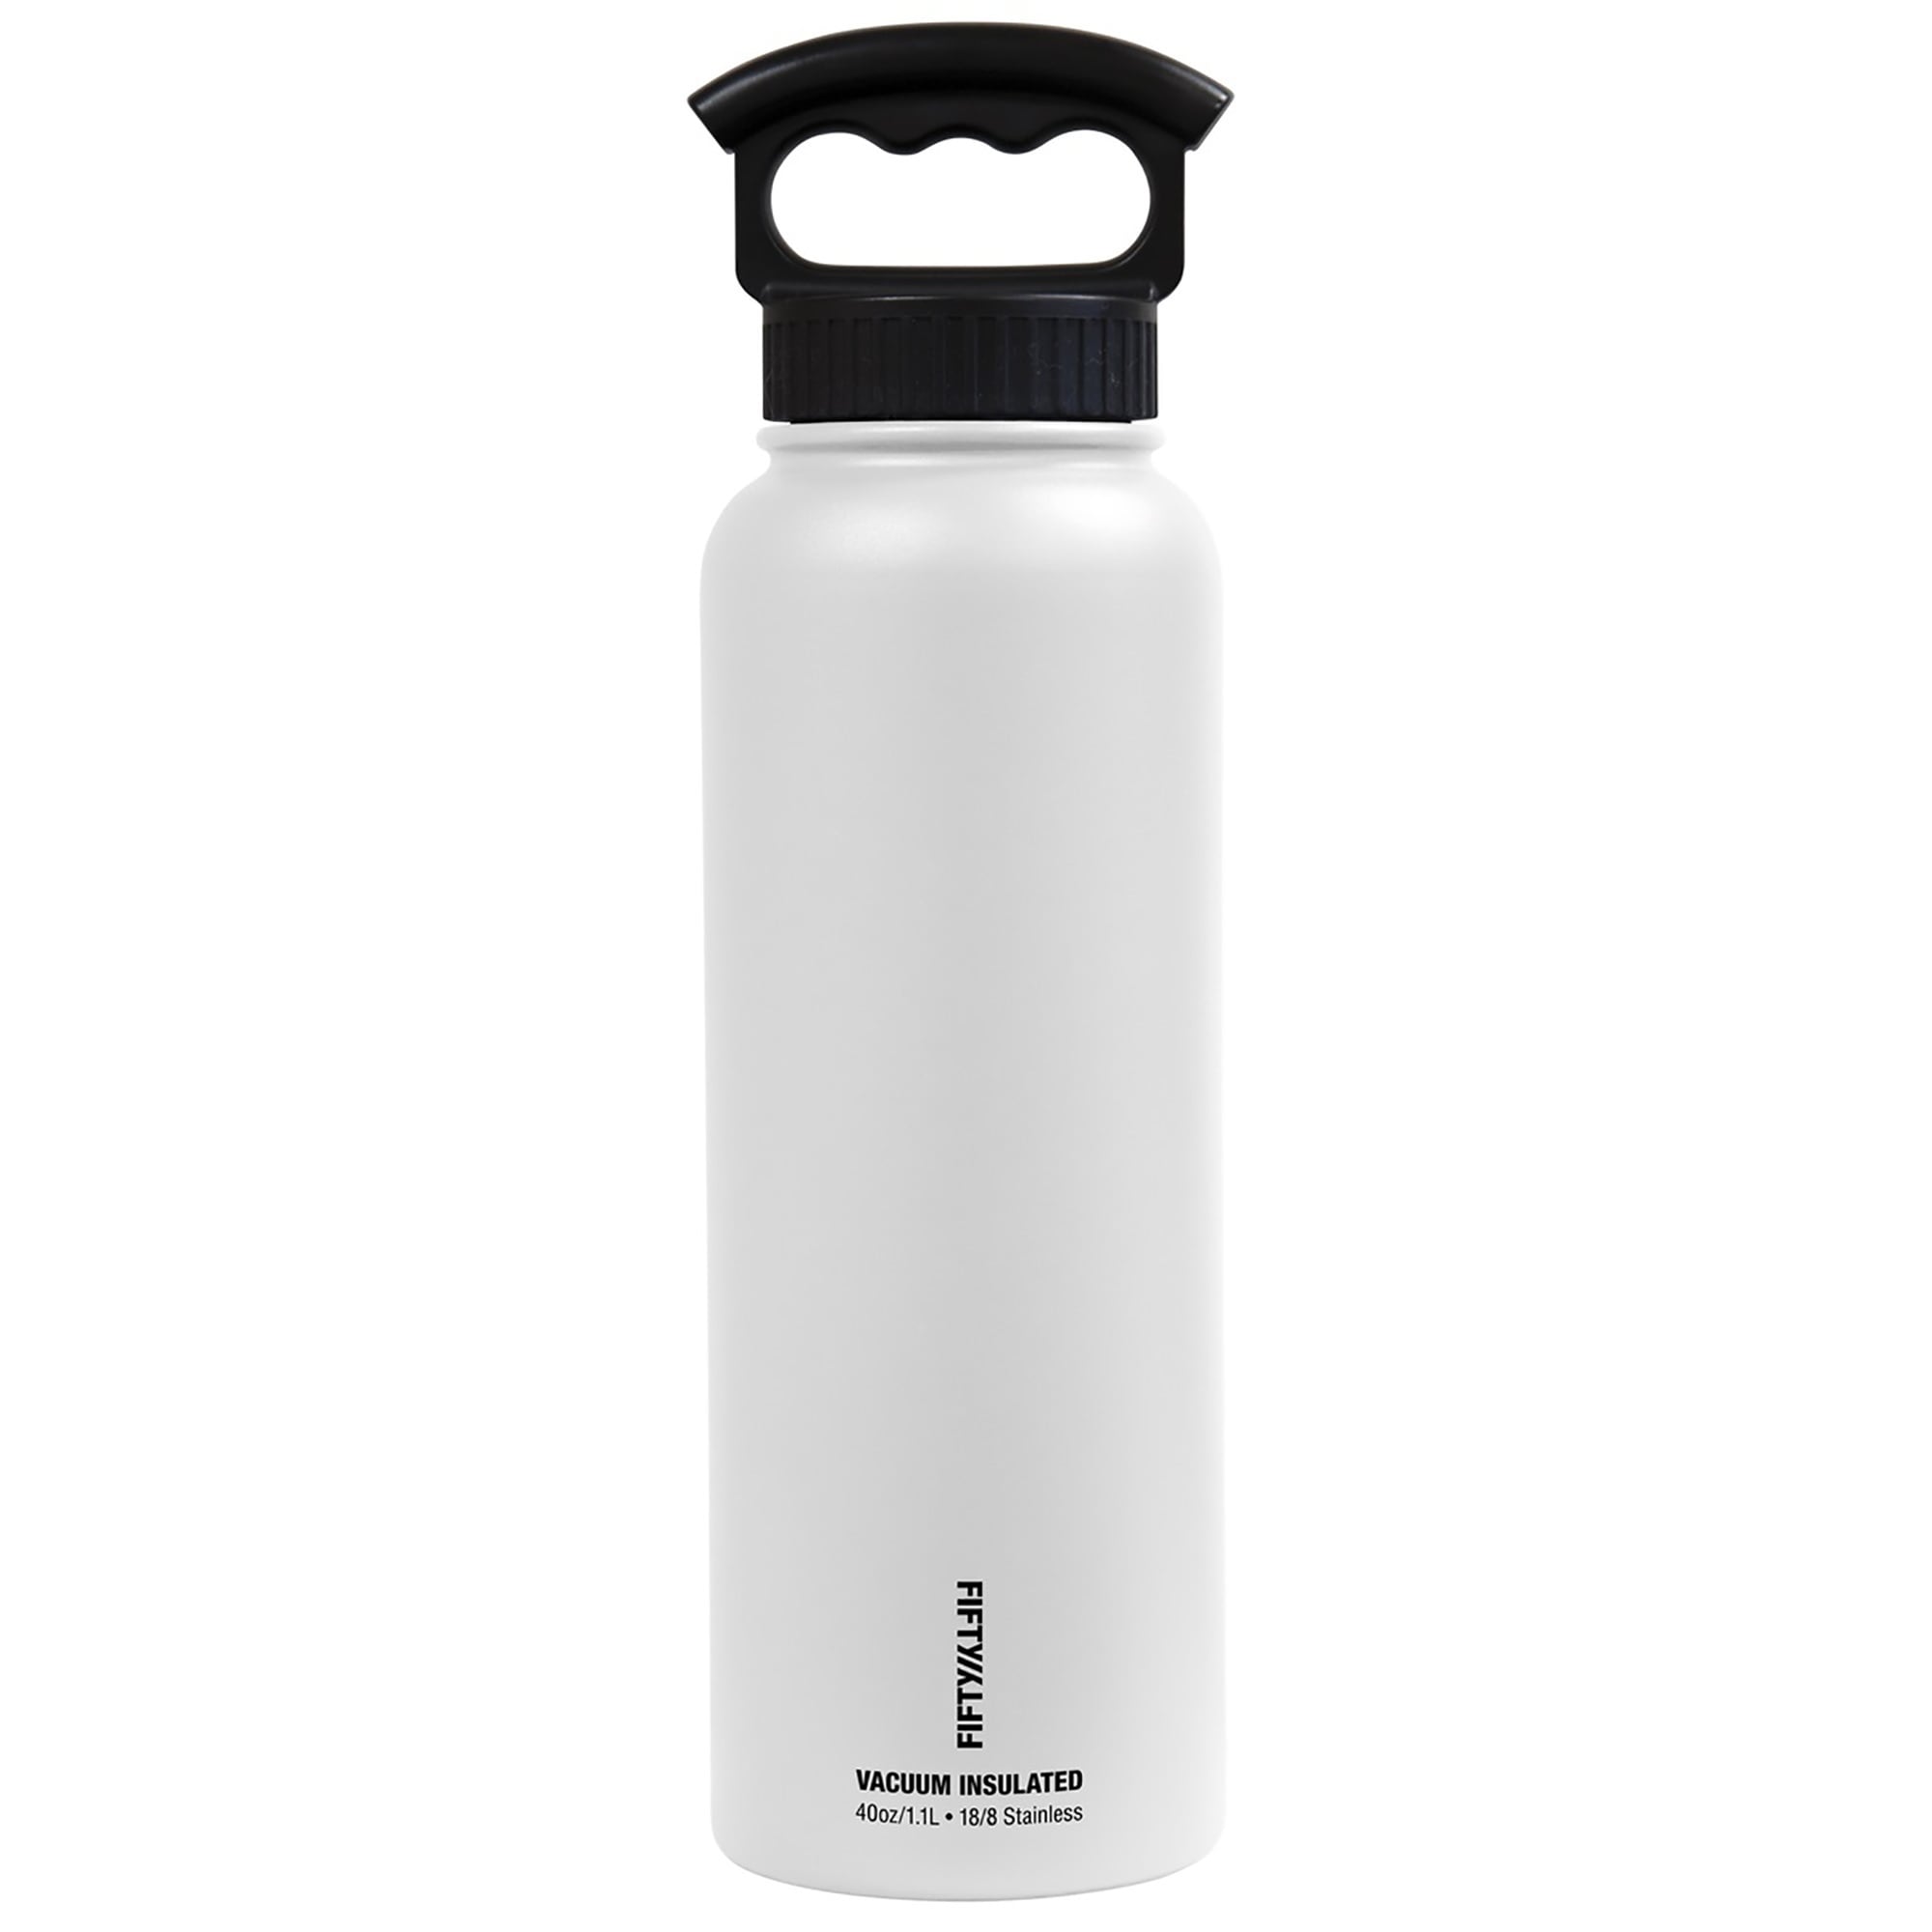 https://ak1.ostkcdn.com/images/products/21866414/40-oz.-Vacuum-Insulated-Bottle-with-Wide-Mouth-3-Finger-Handle-Lid-in-Winter-White-471572c2-45b1-43cd-b6f2-4c4d2799954a.jpg